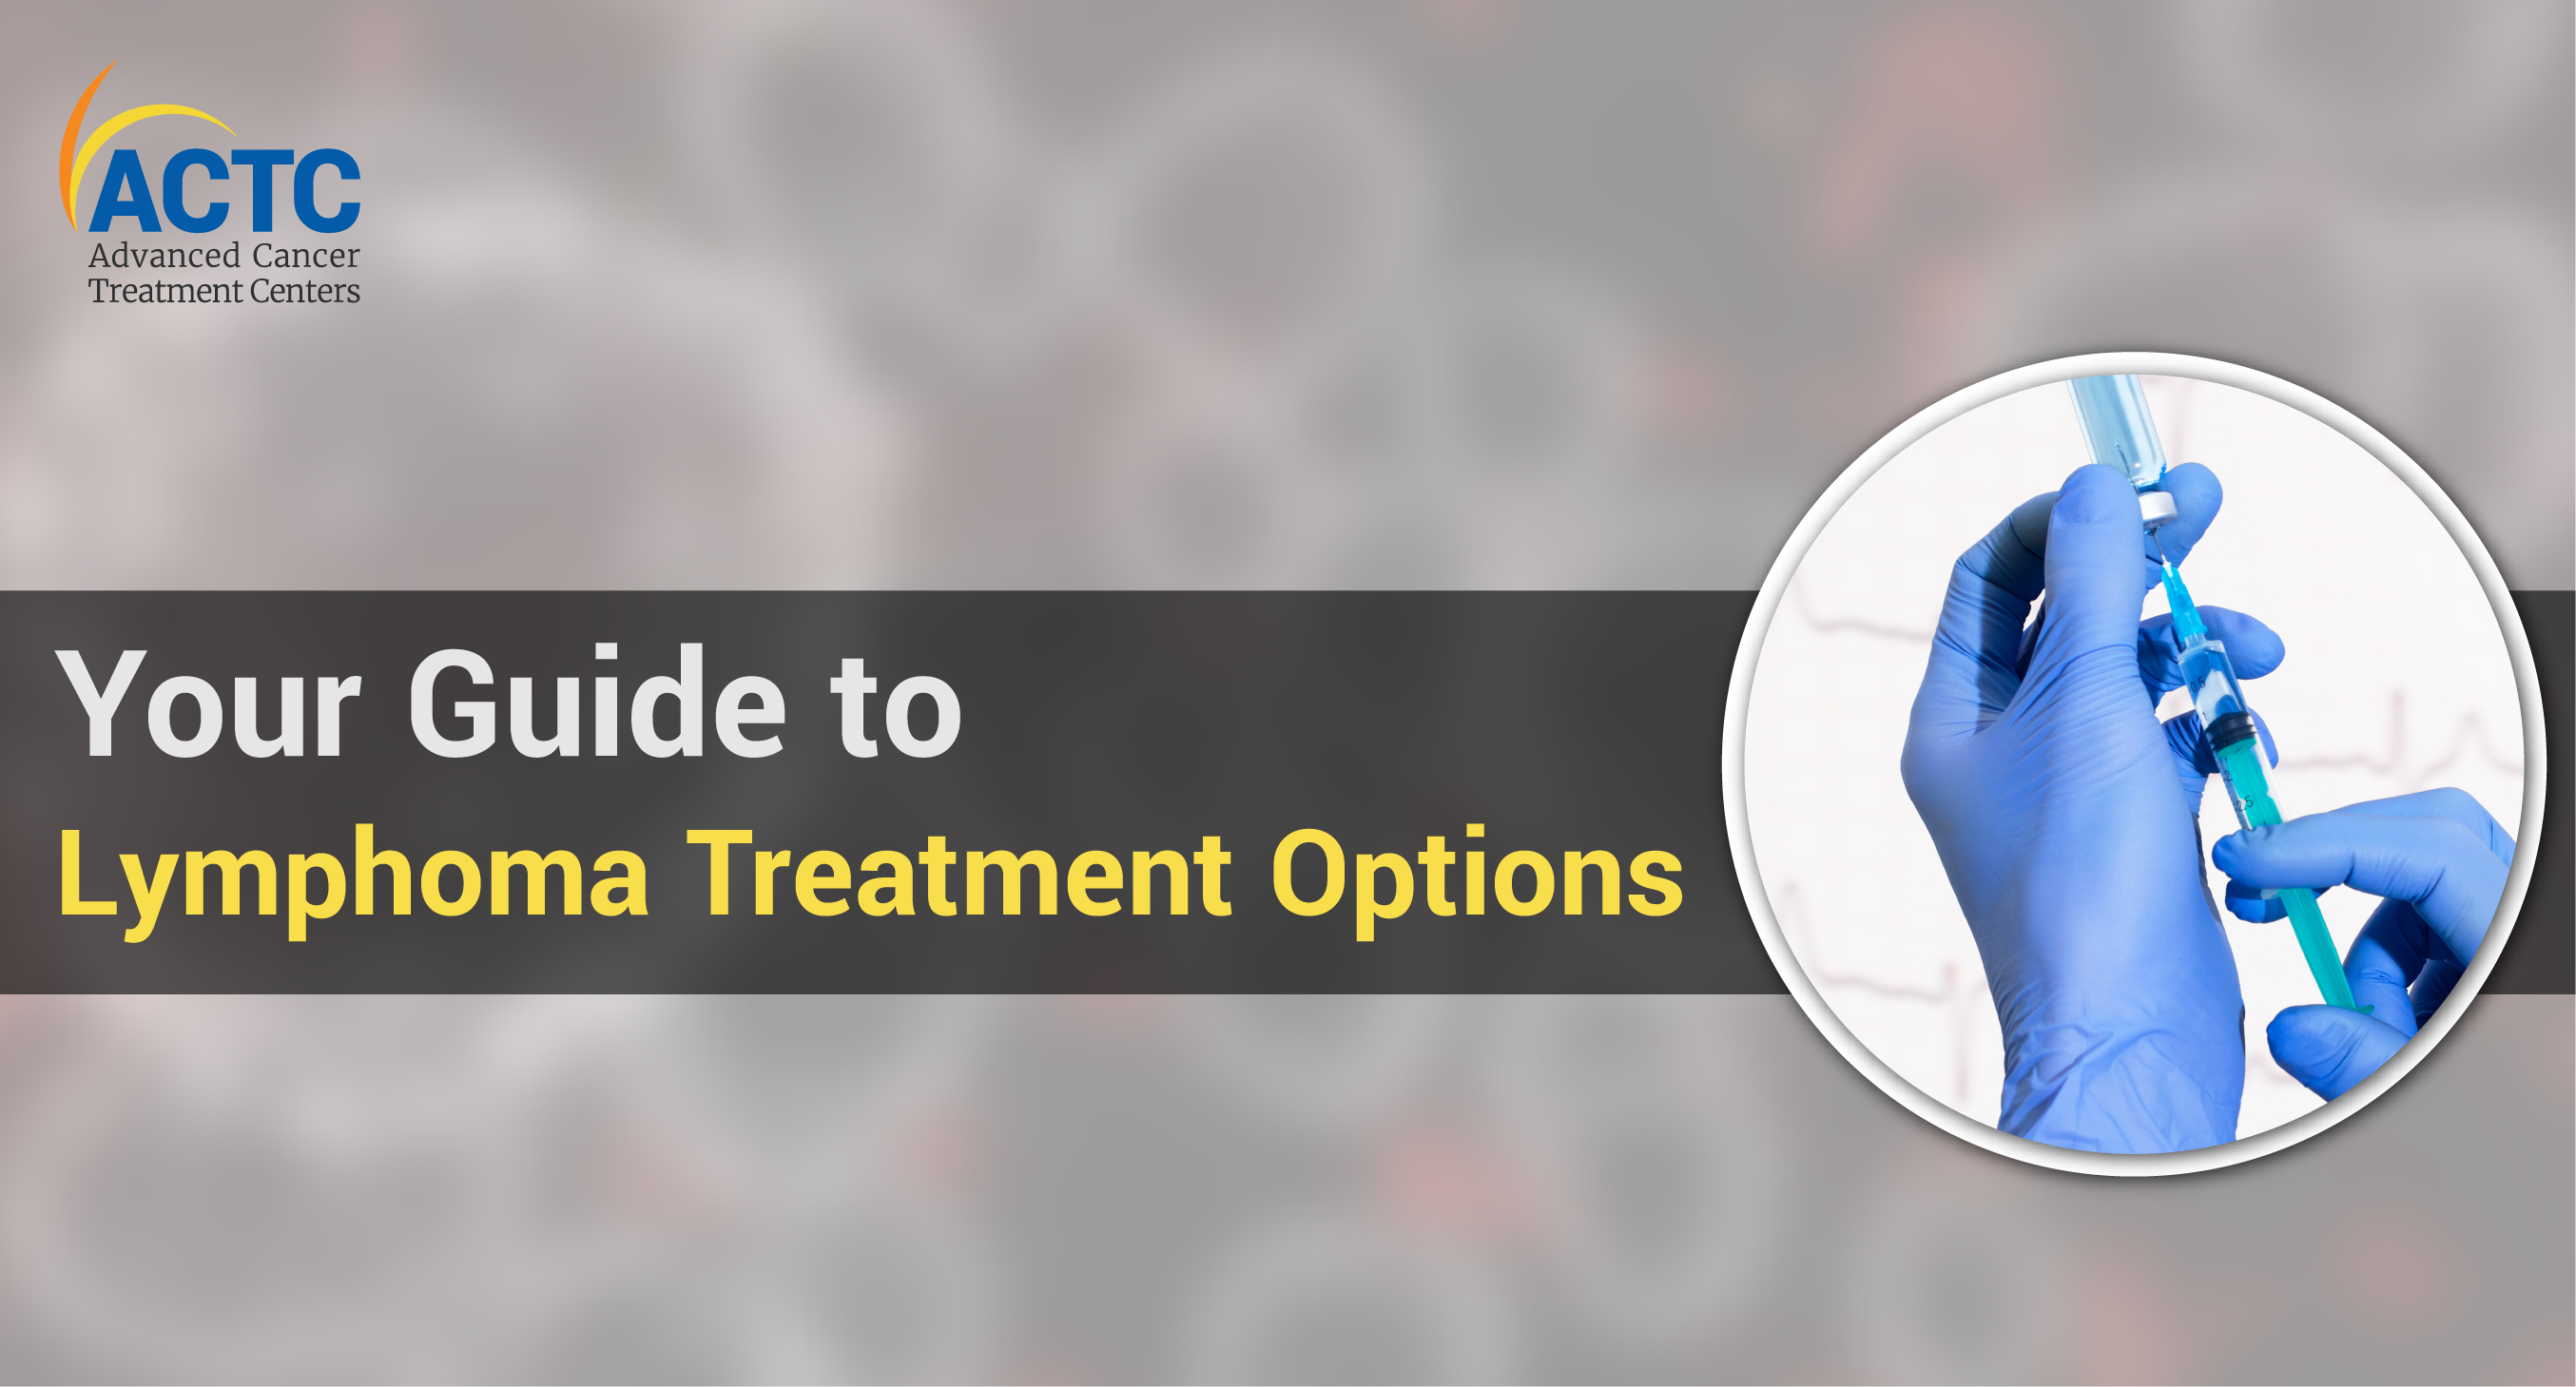 Know about different lymphoma treatment options